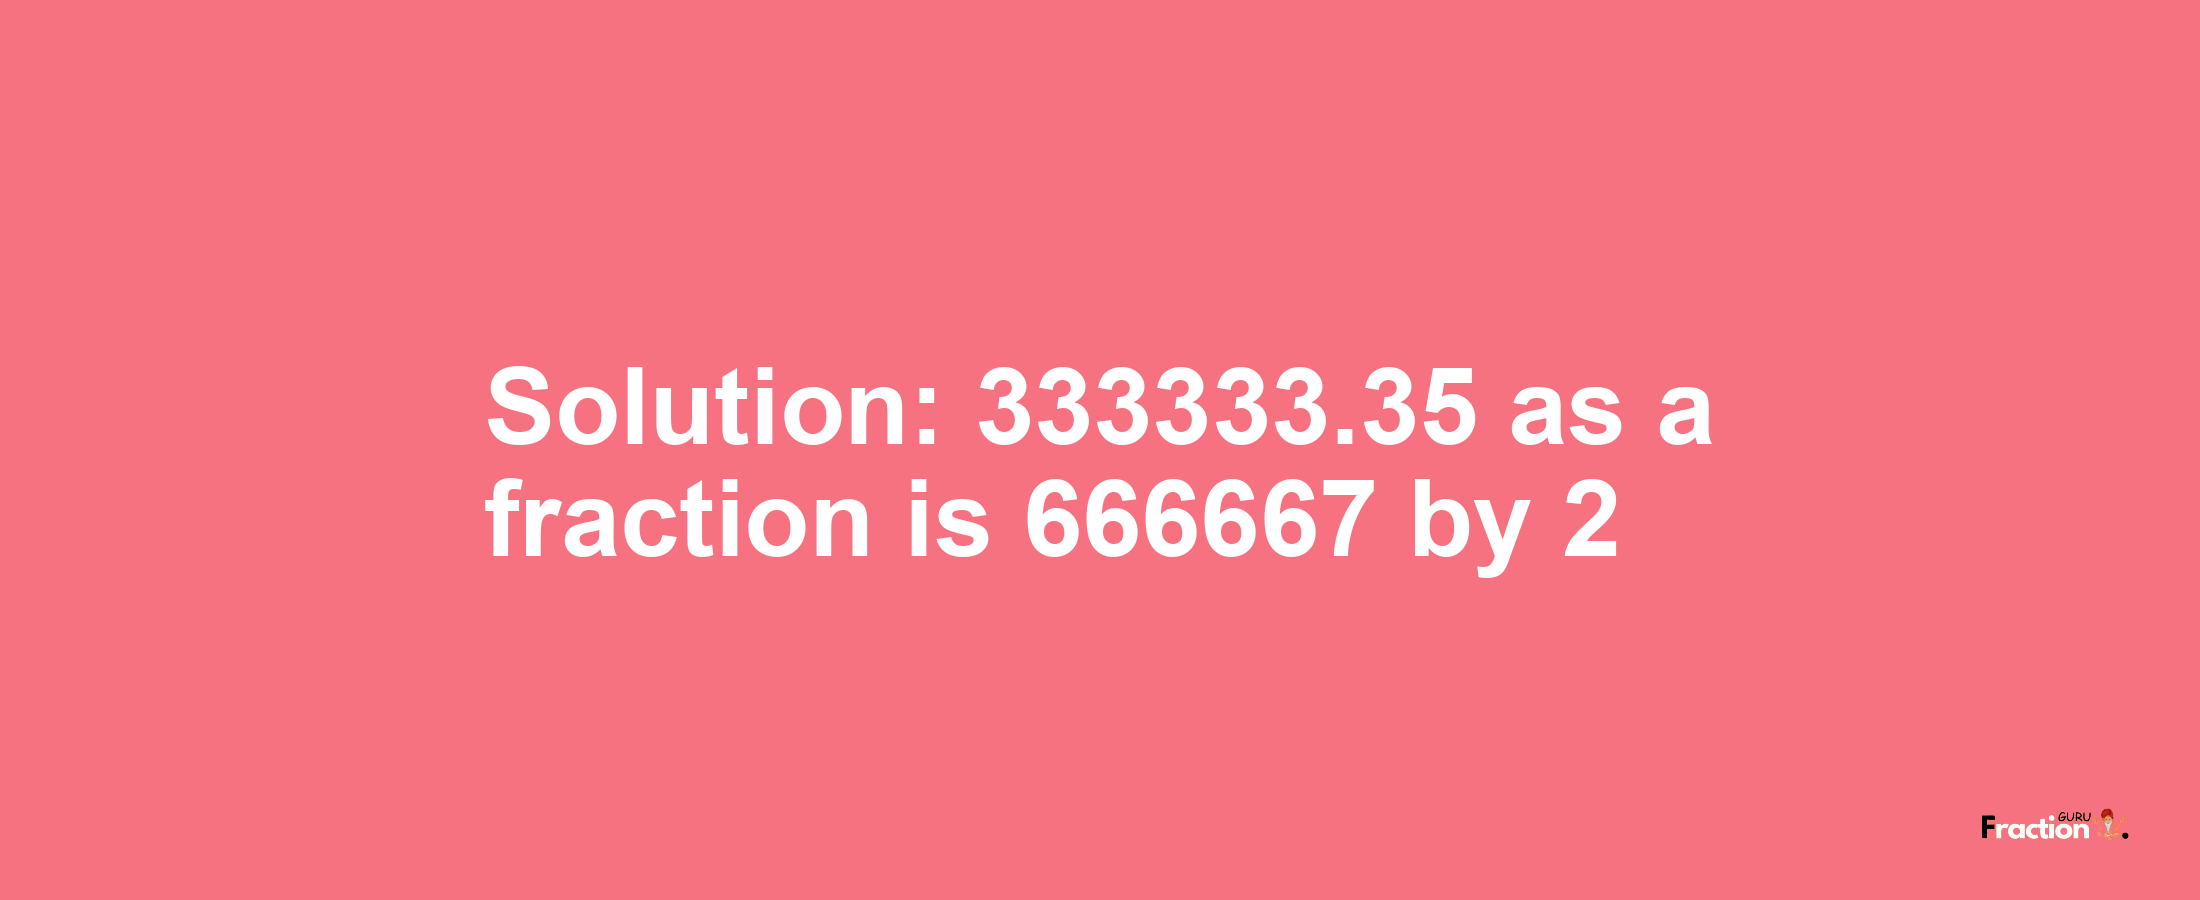 Solution:333333.35 as a fraction is 666667/2